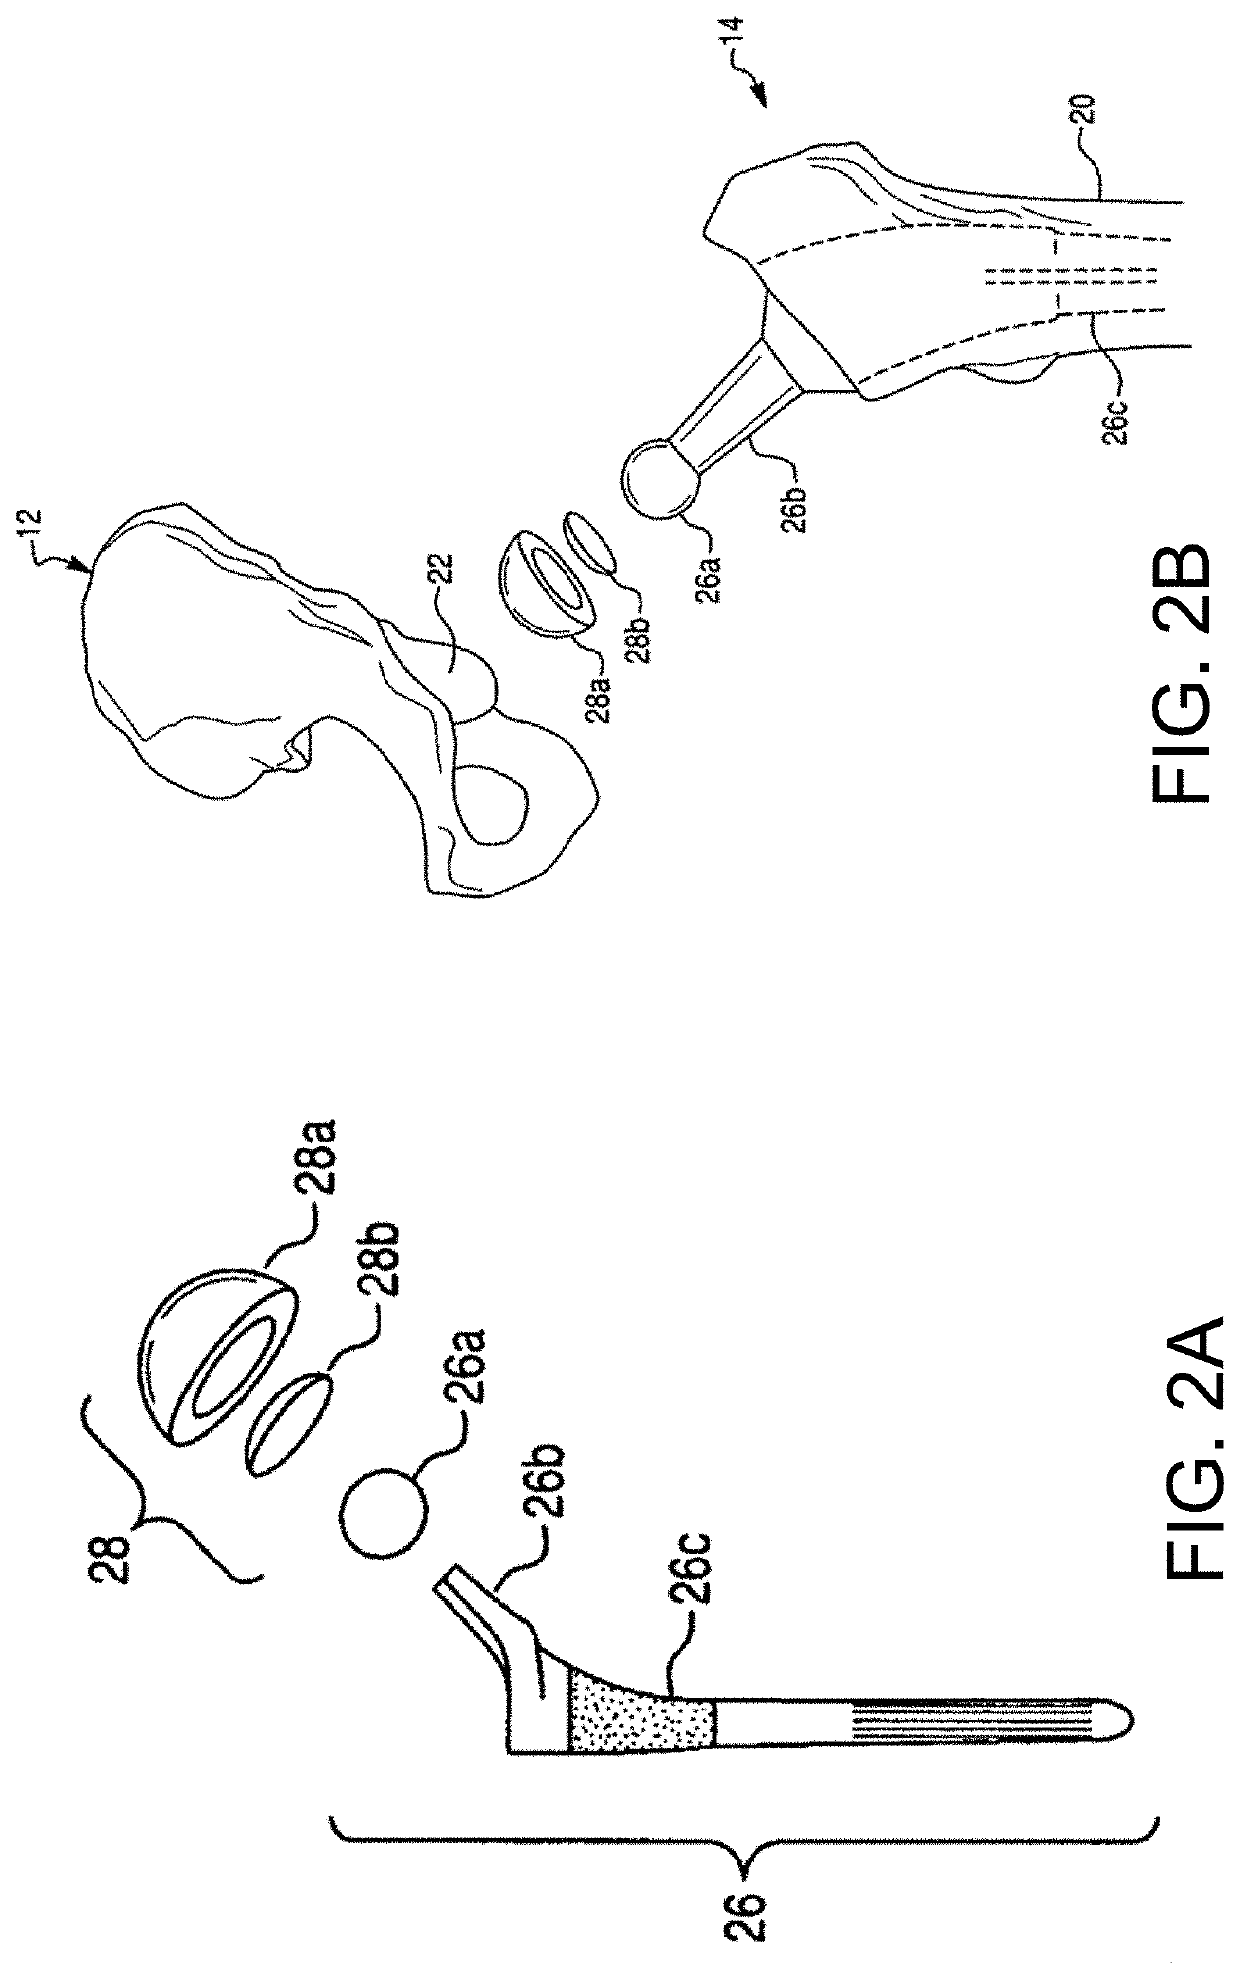 Systems and methods for intra-operative pelvic registration